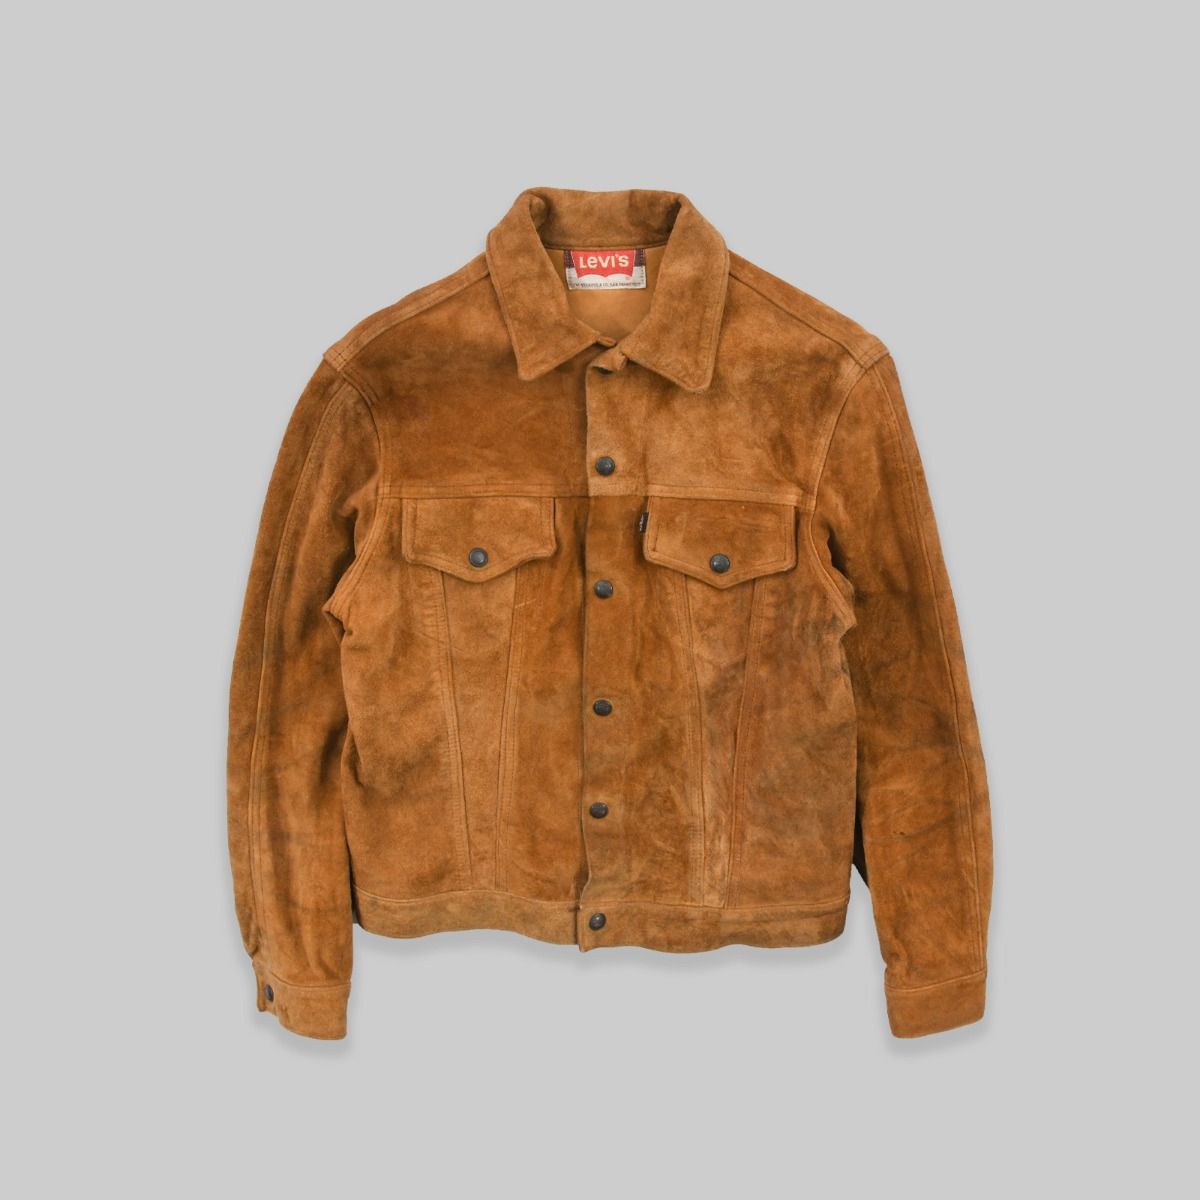 Levi's 1970s Suede Leather Jacket